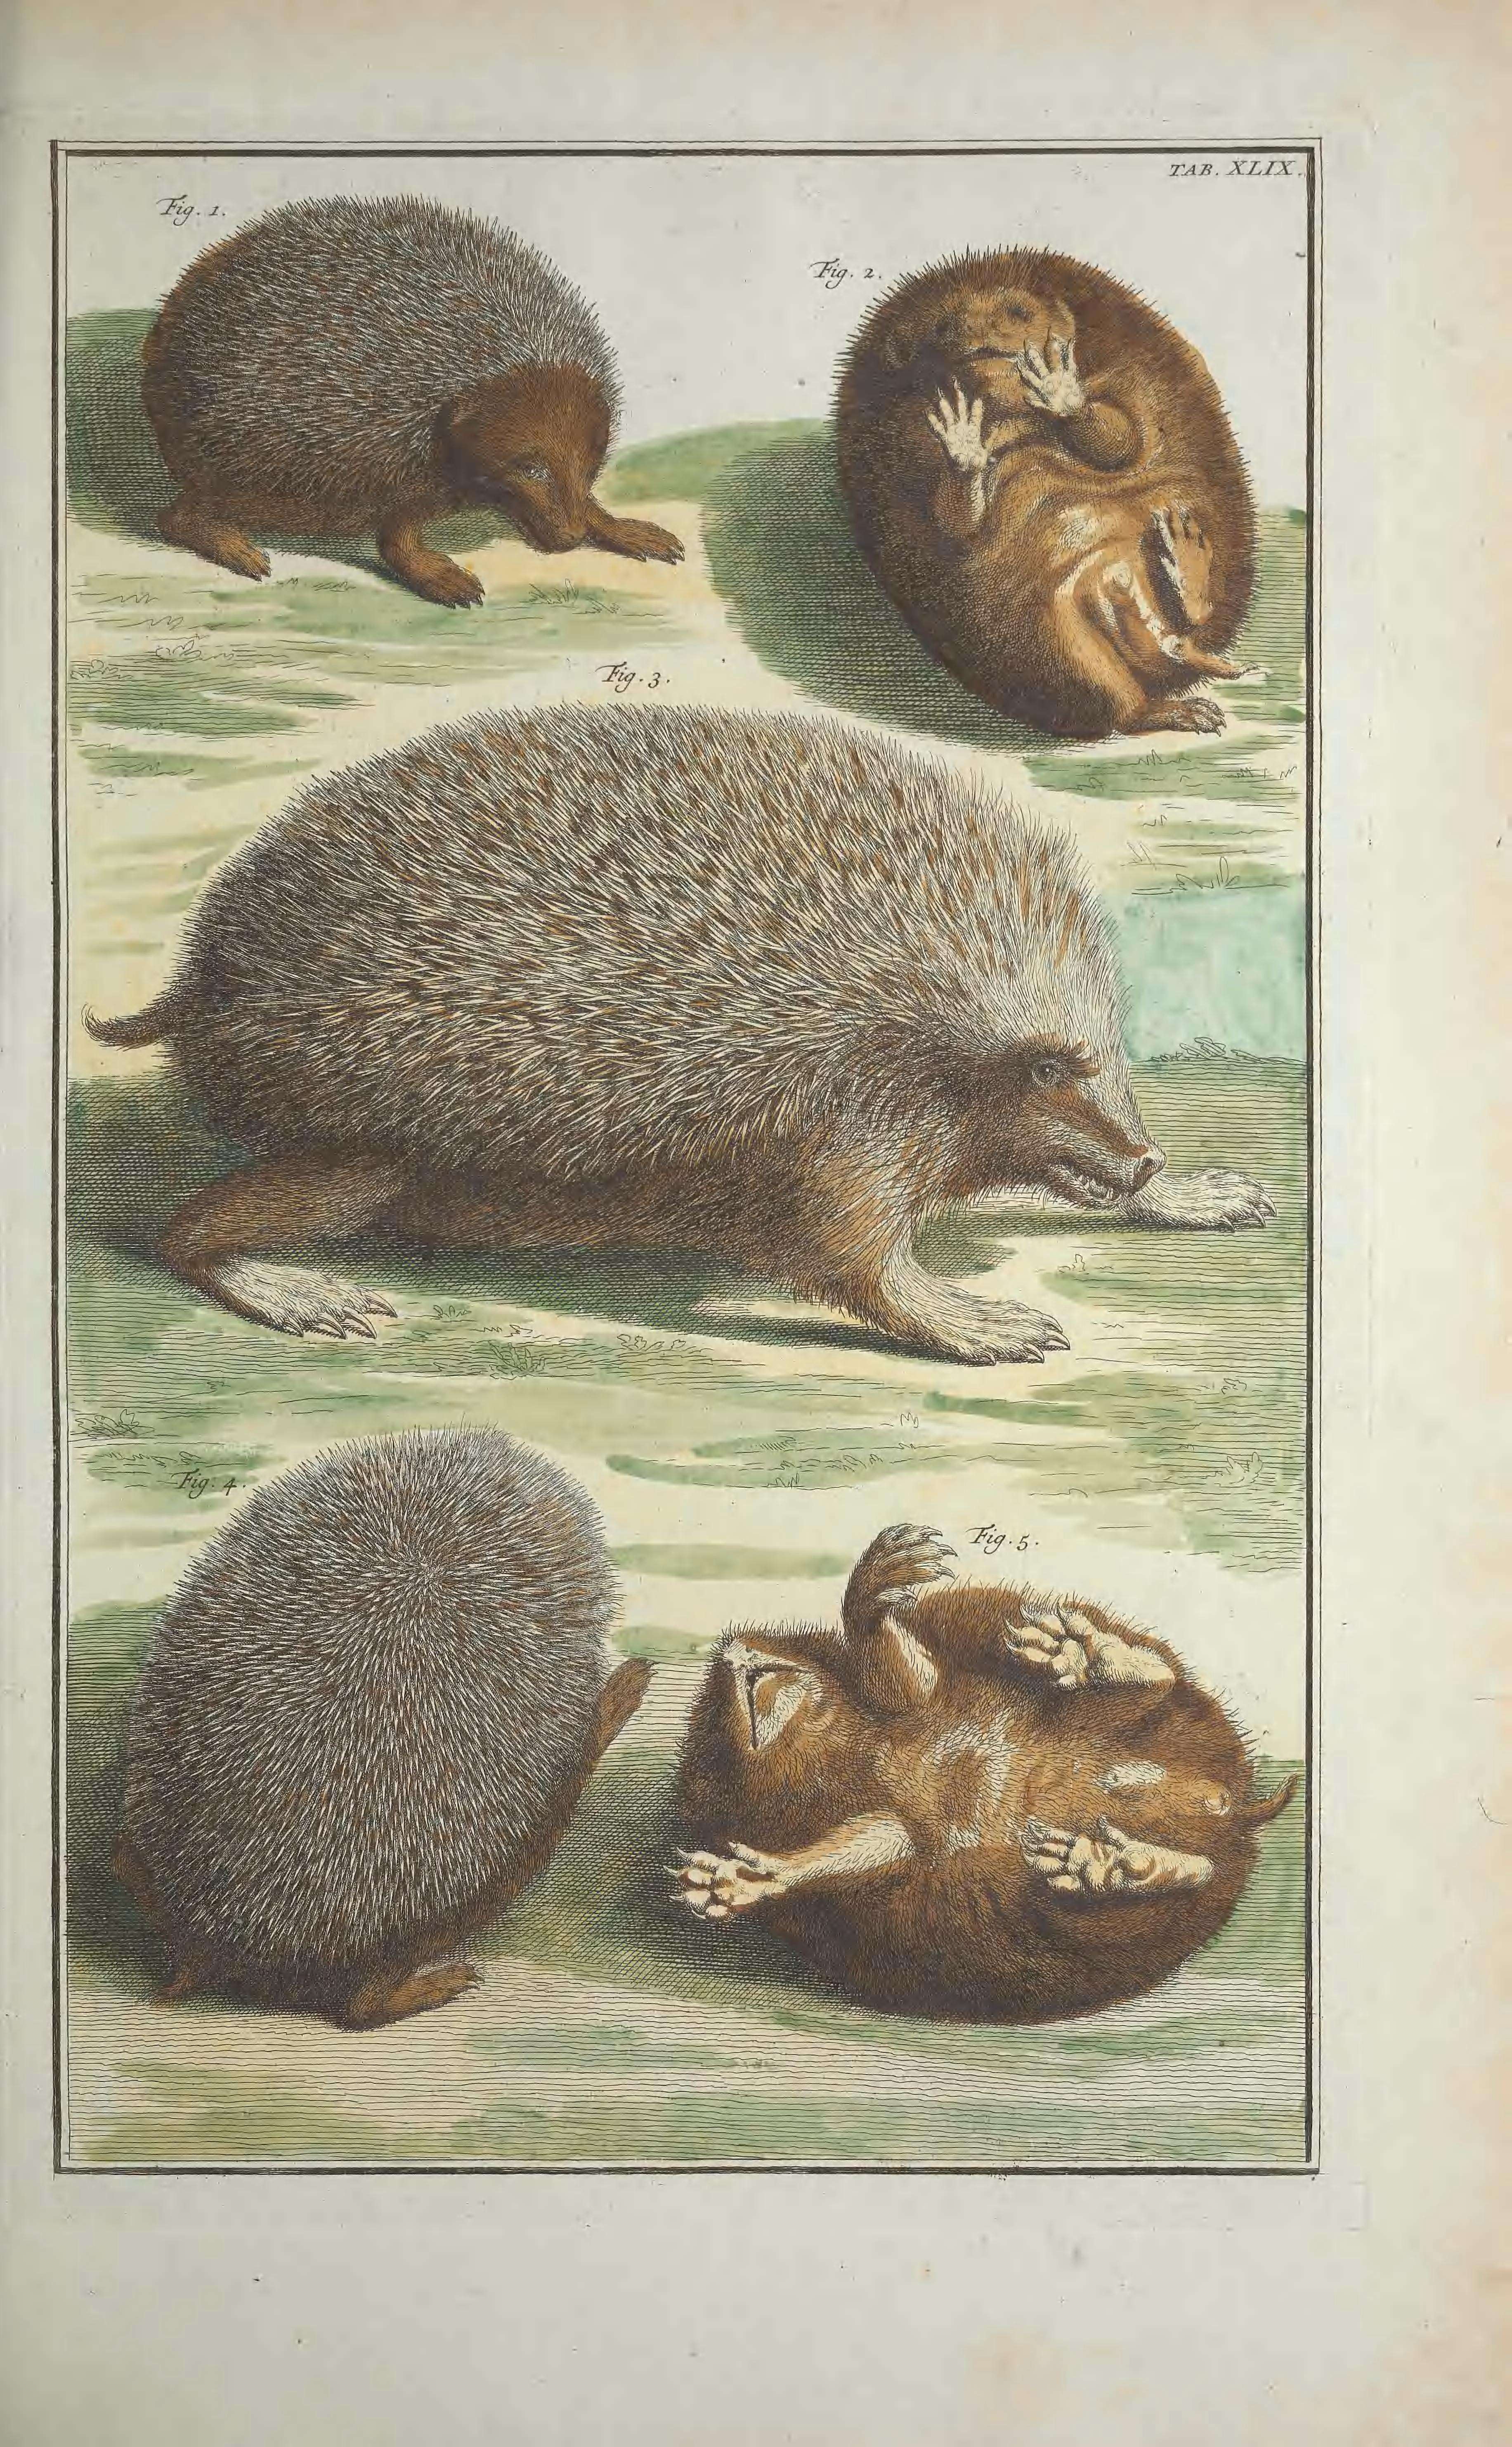 Image of gymnures and hedgehogs